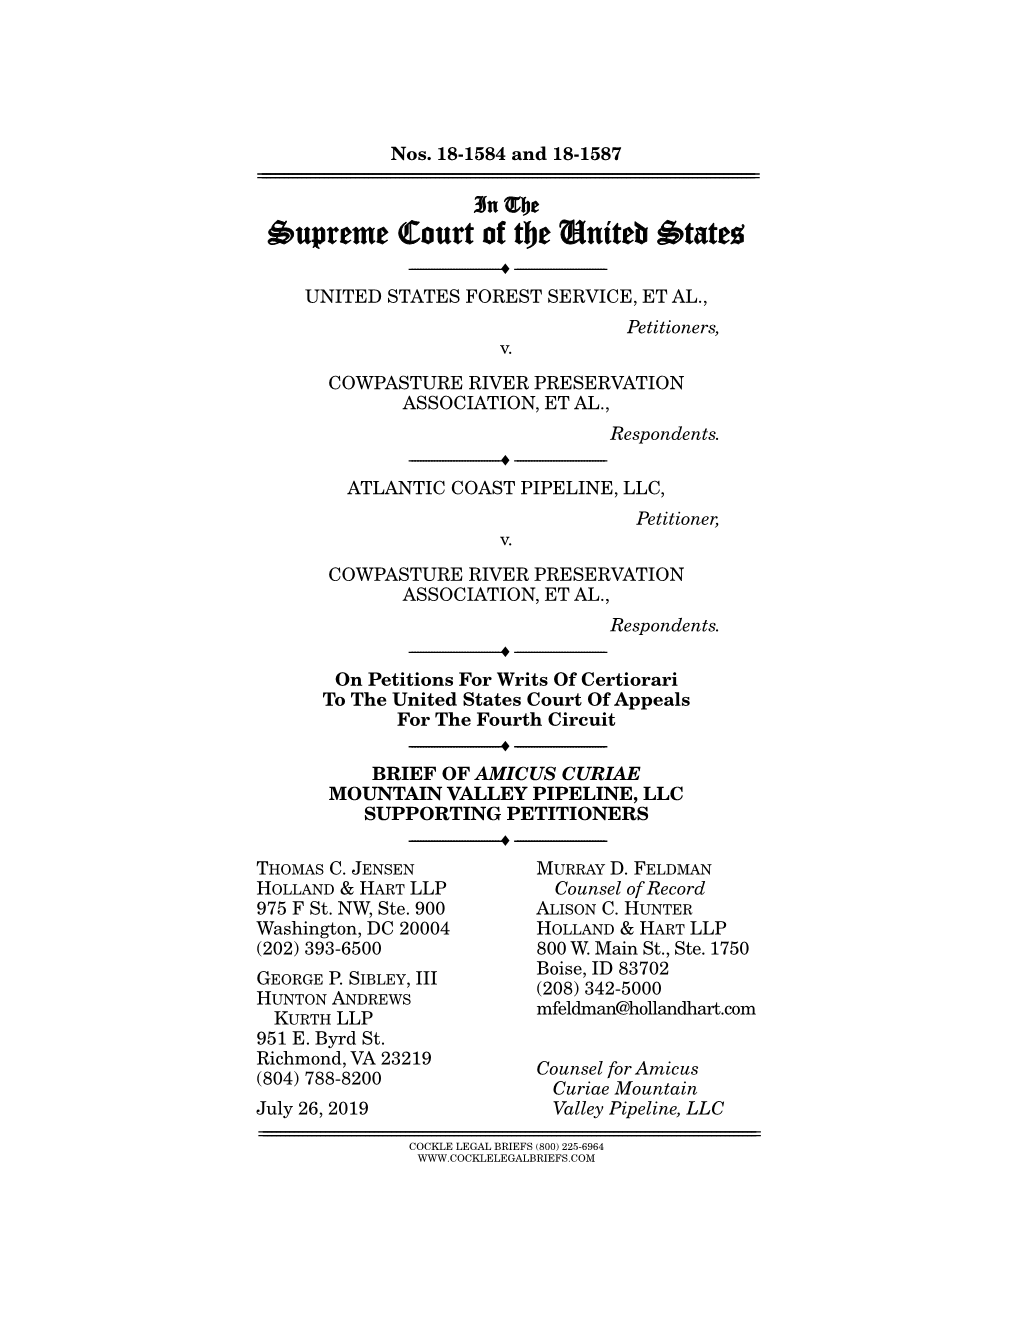 Brief of Amicus Curiae Mountain Valley Pipeline, Llc Supporting Petitioners ------ ------Thomas C